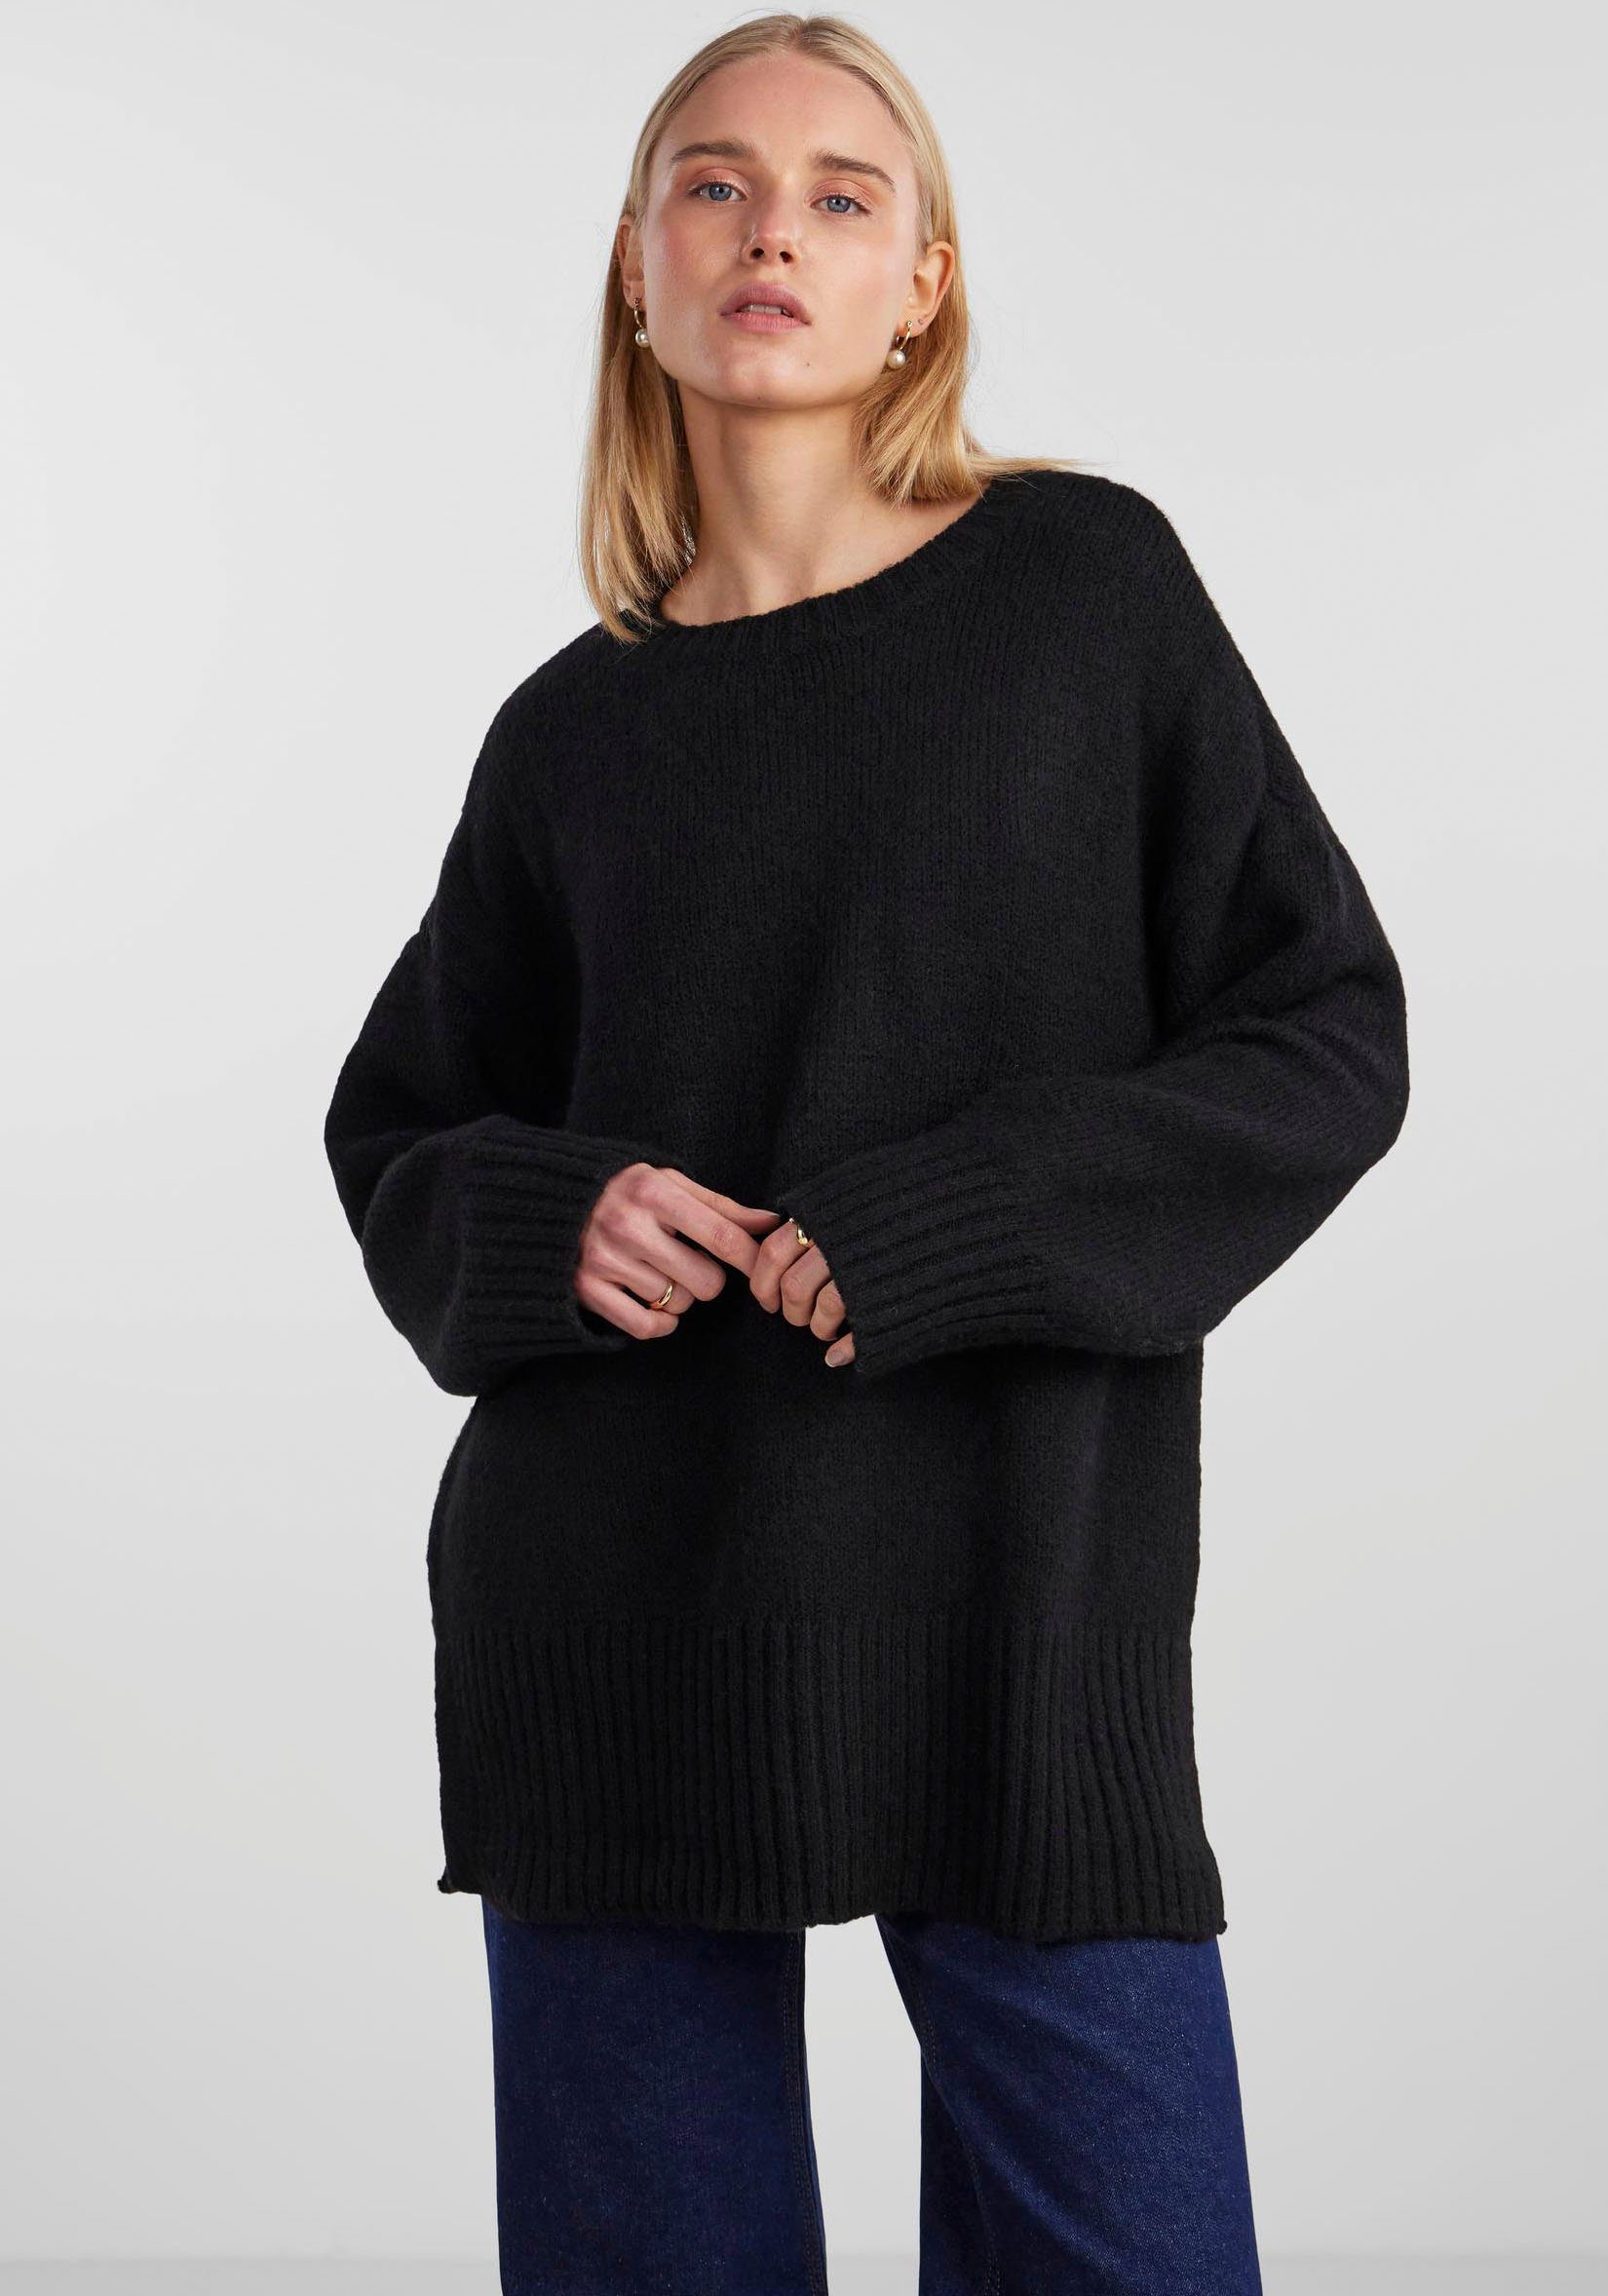 O-NECK KNIT Strickpullover LOOSE NOOS pieces Black Oversized BC PCNANCY LS